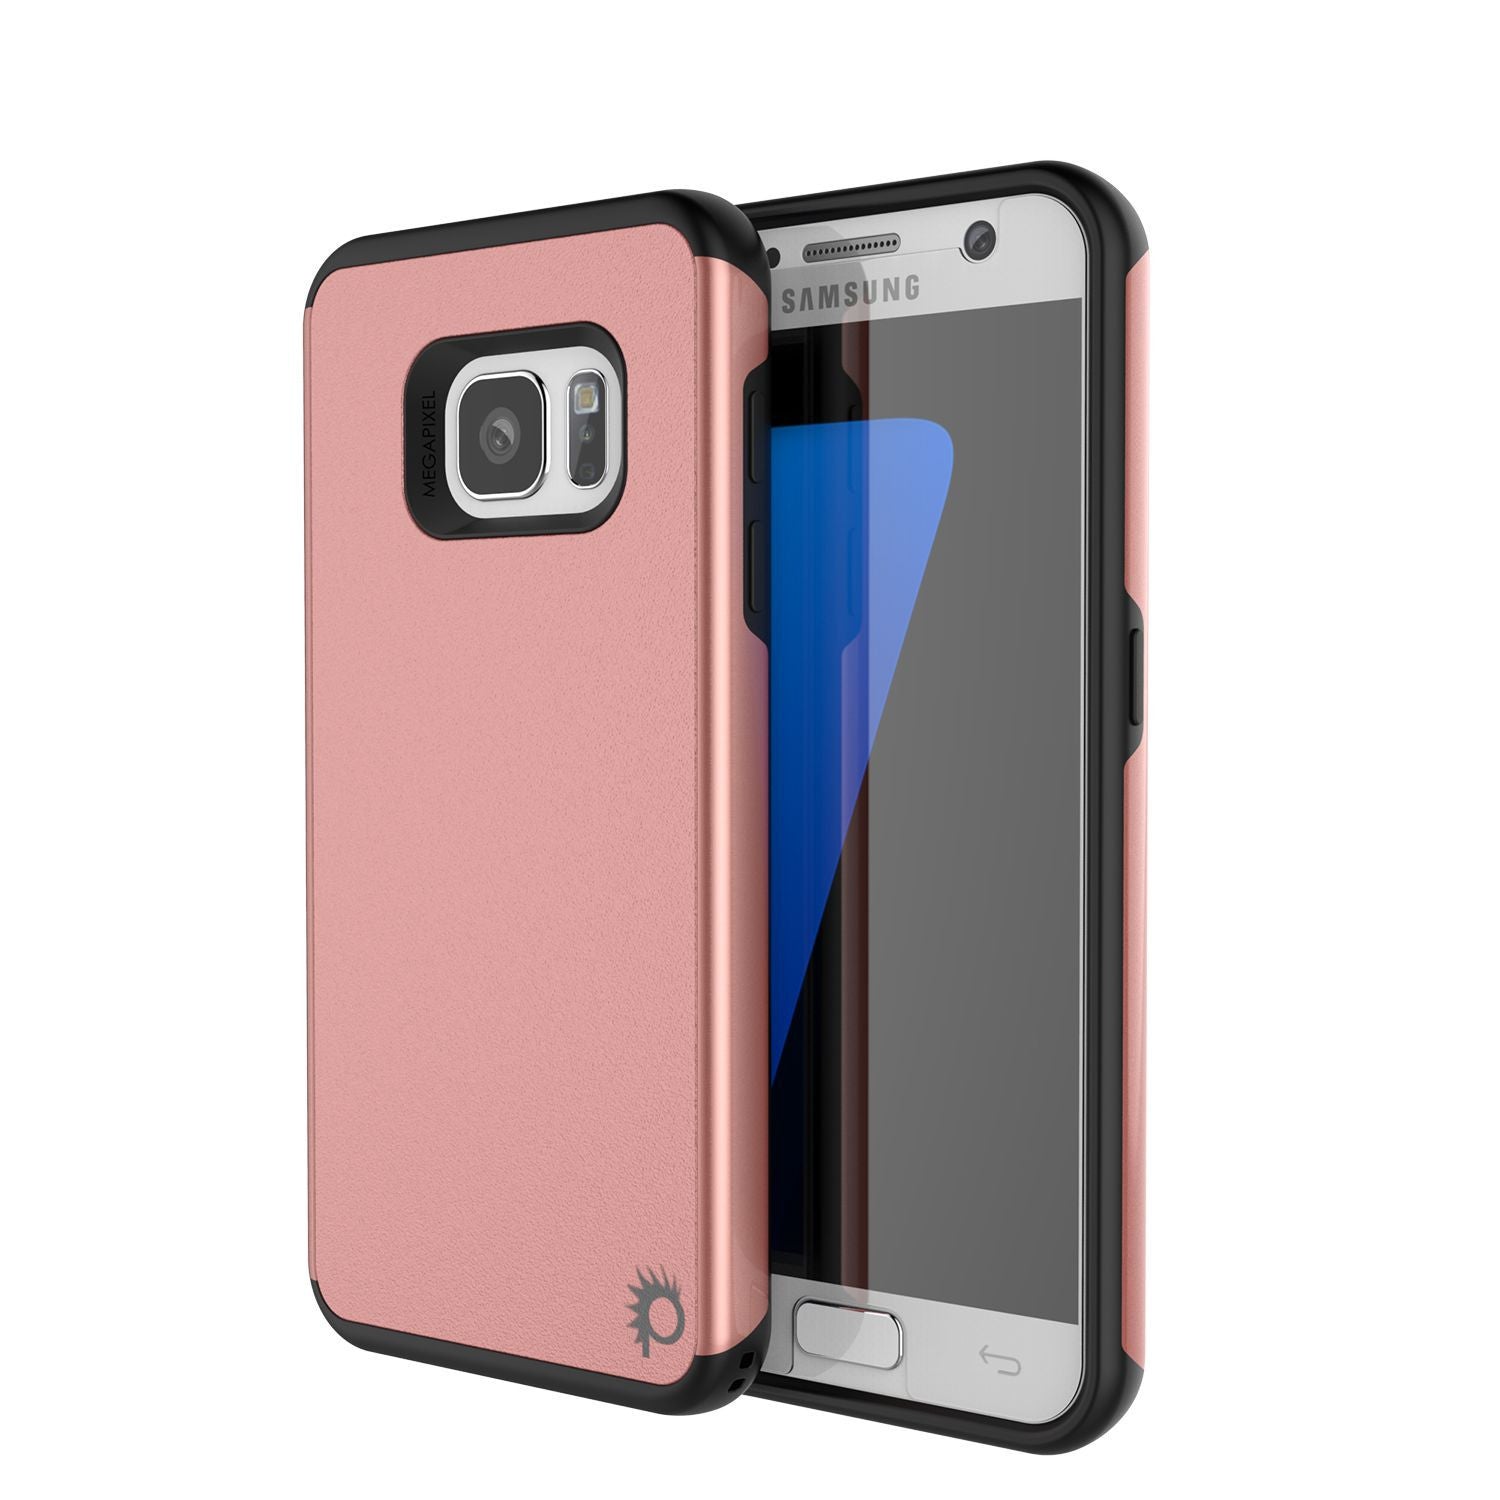 PUNKCASE - Galatic Series Protective Armor Case for Samsung S7 Edge | Rose Gold